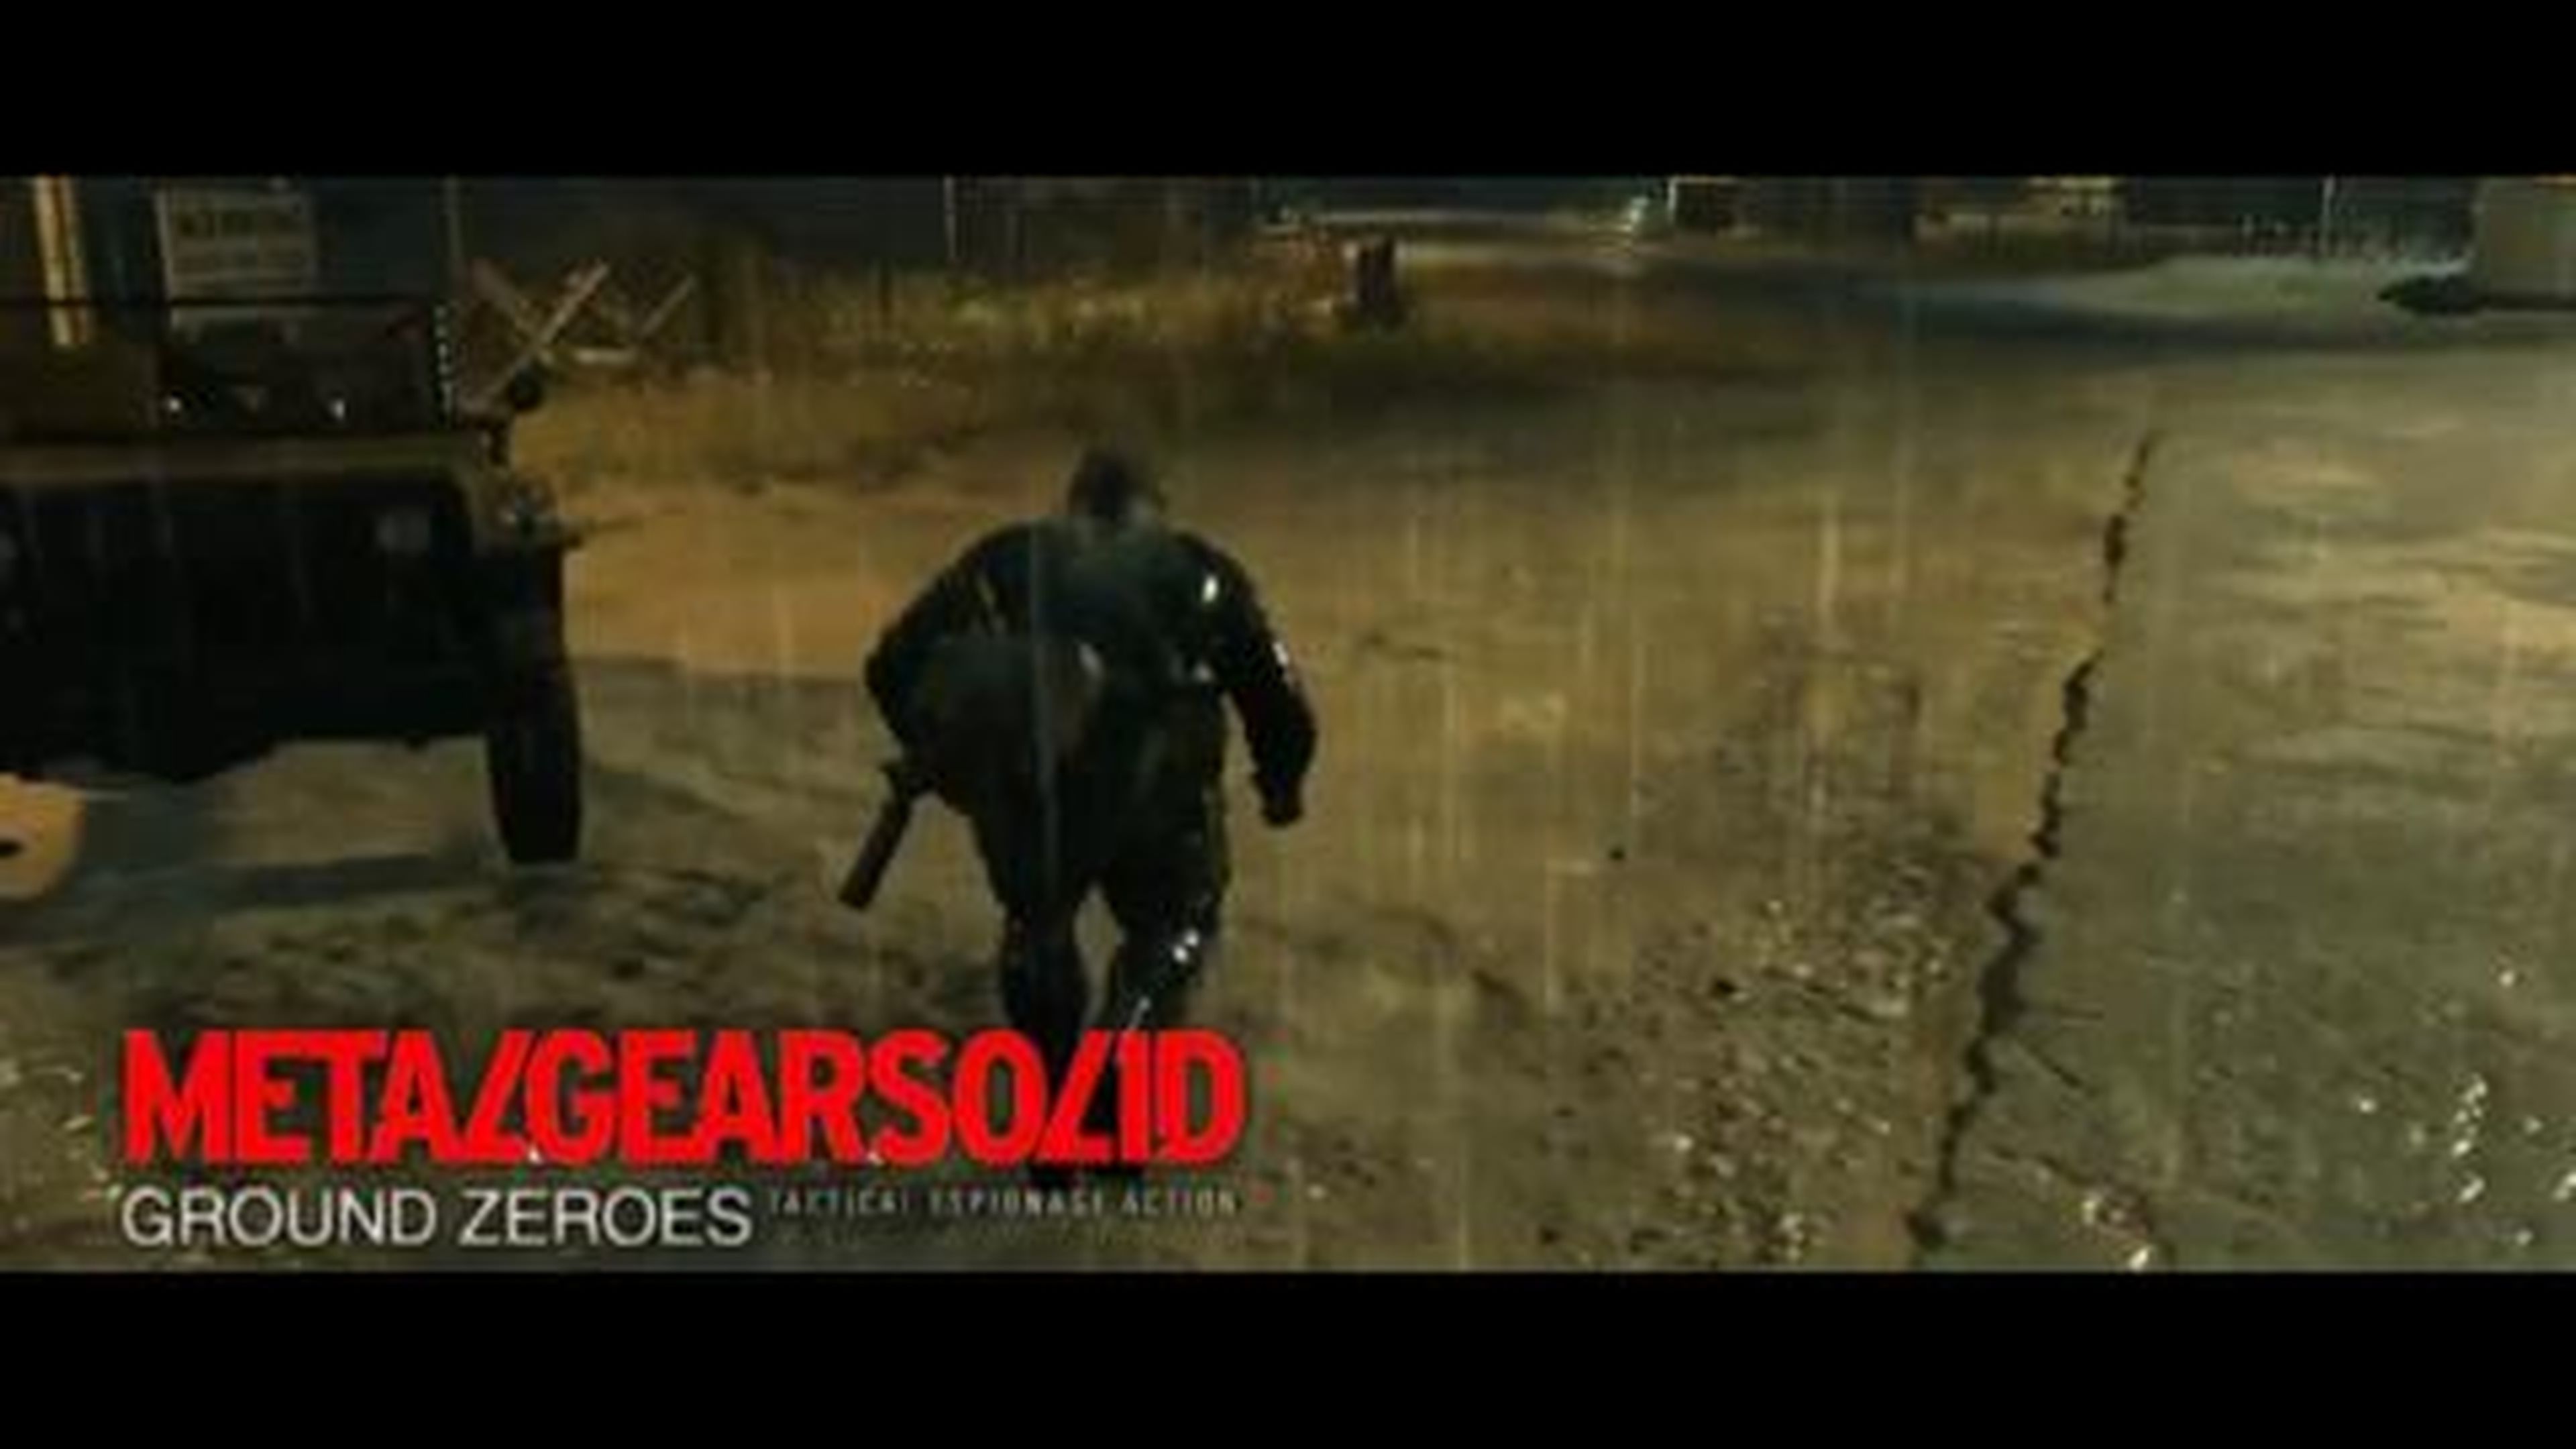 MGS Ground Zeroes - EXTENDED GAMEPLAY! Hobbyconsolas.com